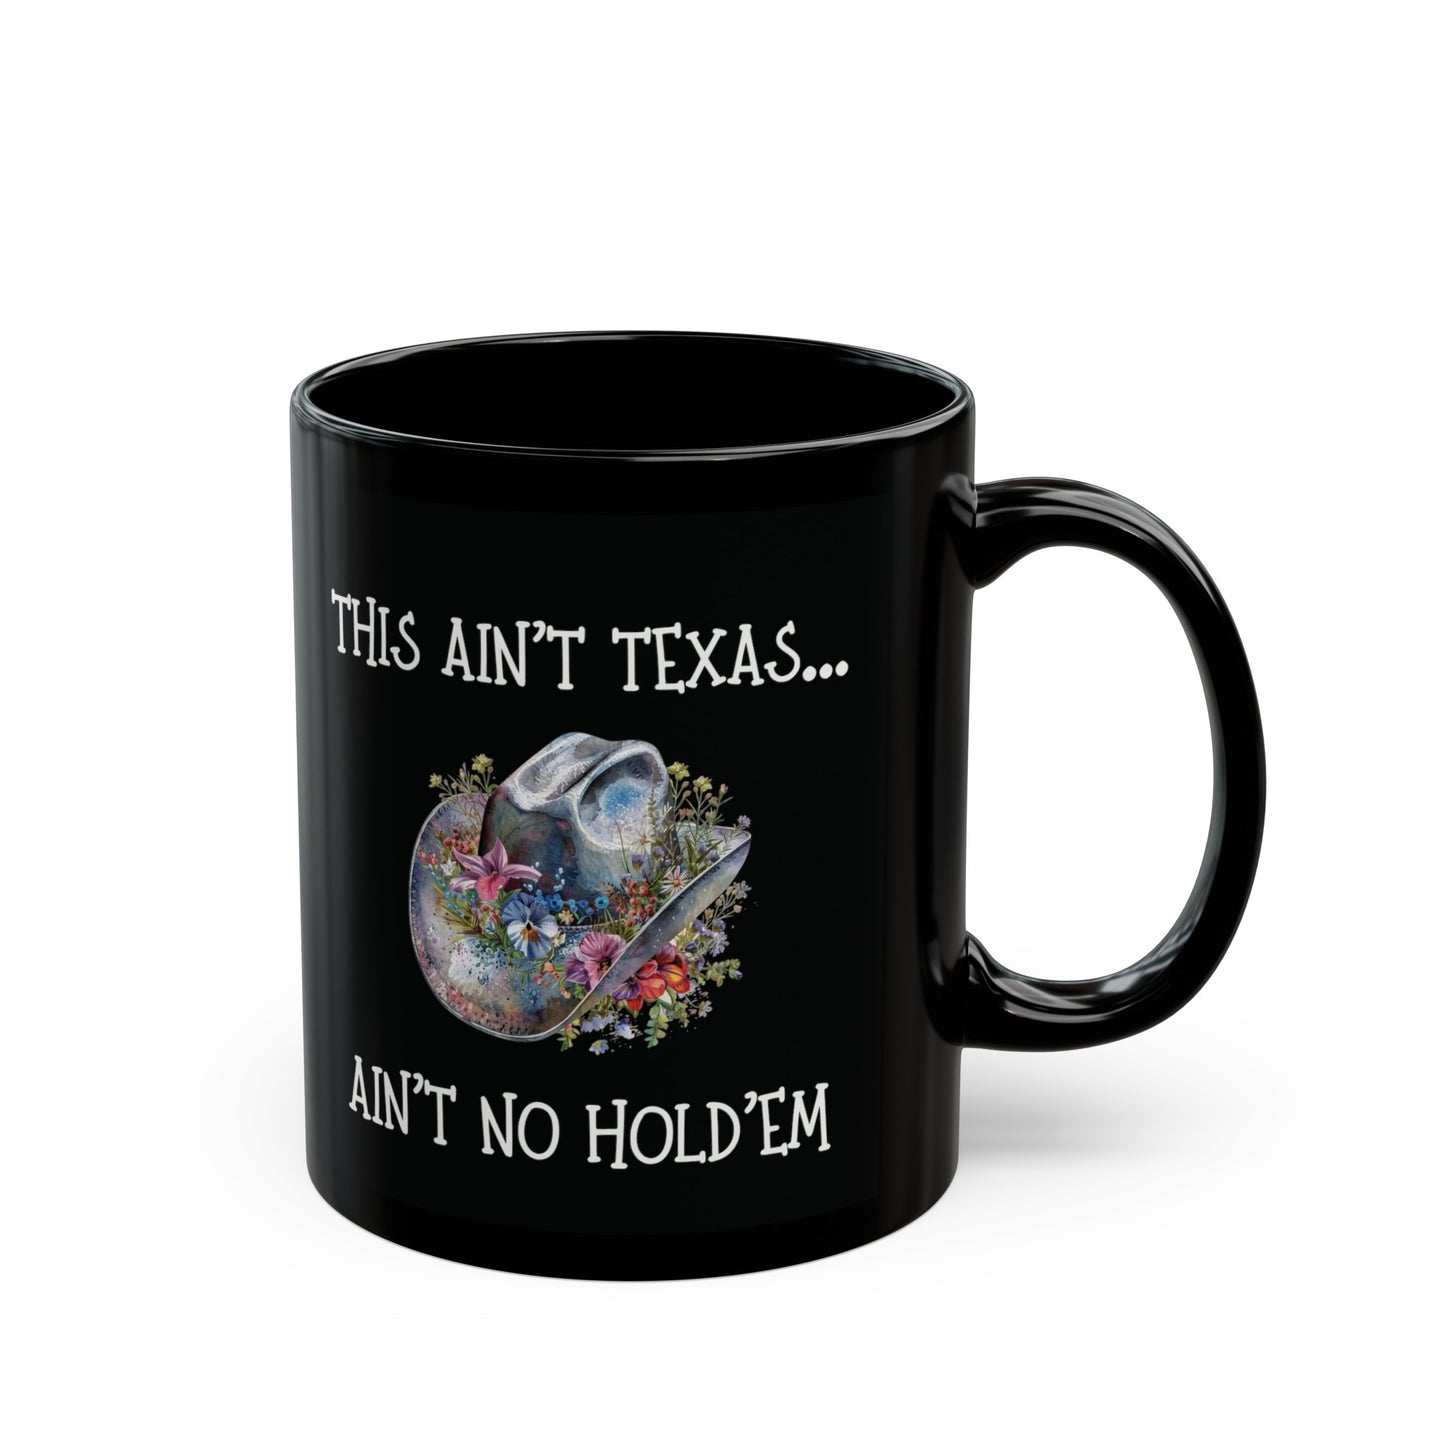 AIN'T NO HOLD'EM Graphic Black Mug (11oz, 15oz), Cowboy Carter Inspired, Urban Cowgirl Graphic, Fan Art, Cowgirl Hat Graphic, Country Mug, Western Graphic Mug, Gift for Her, Mother's Day Gift